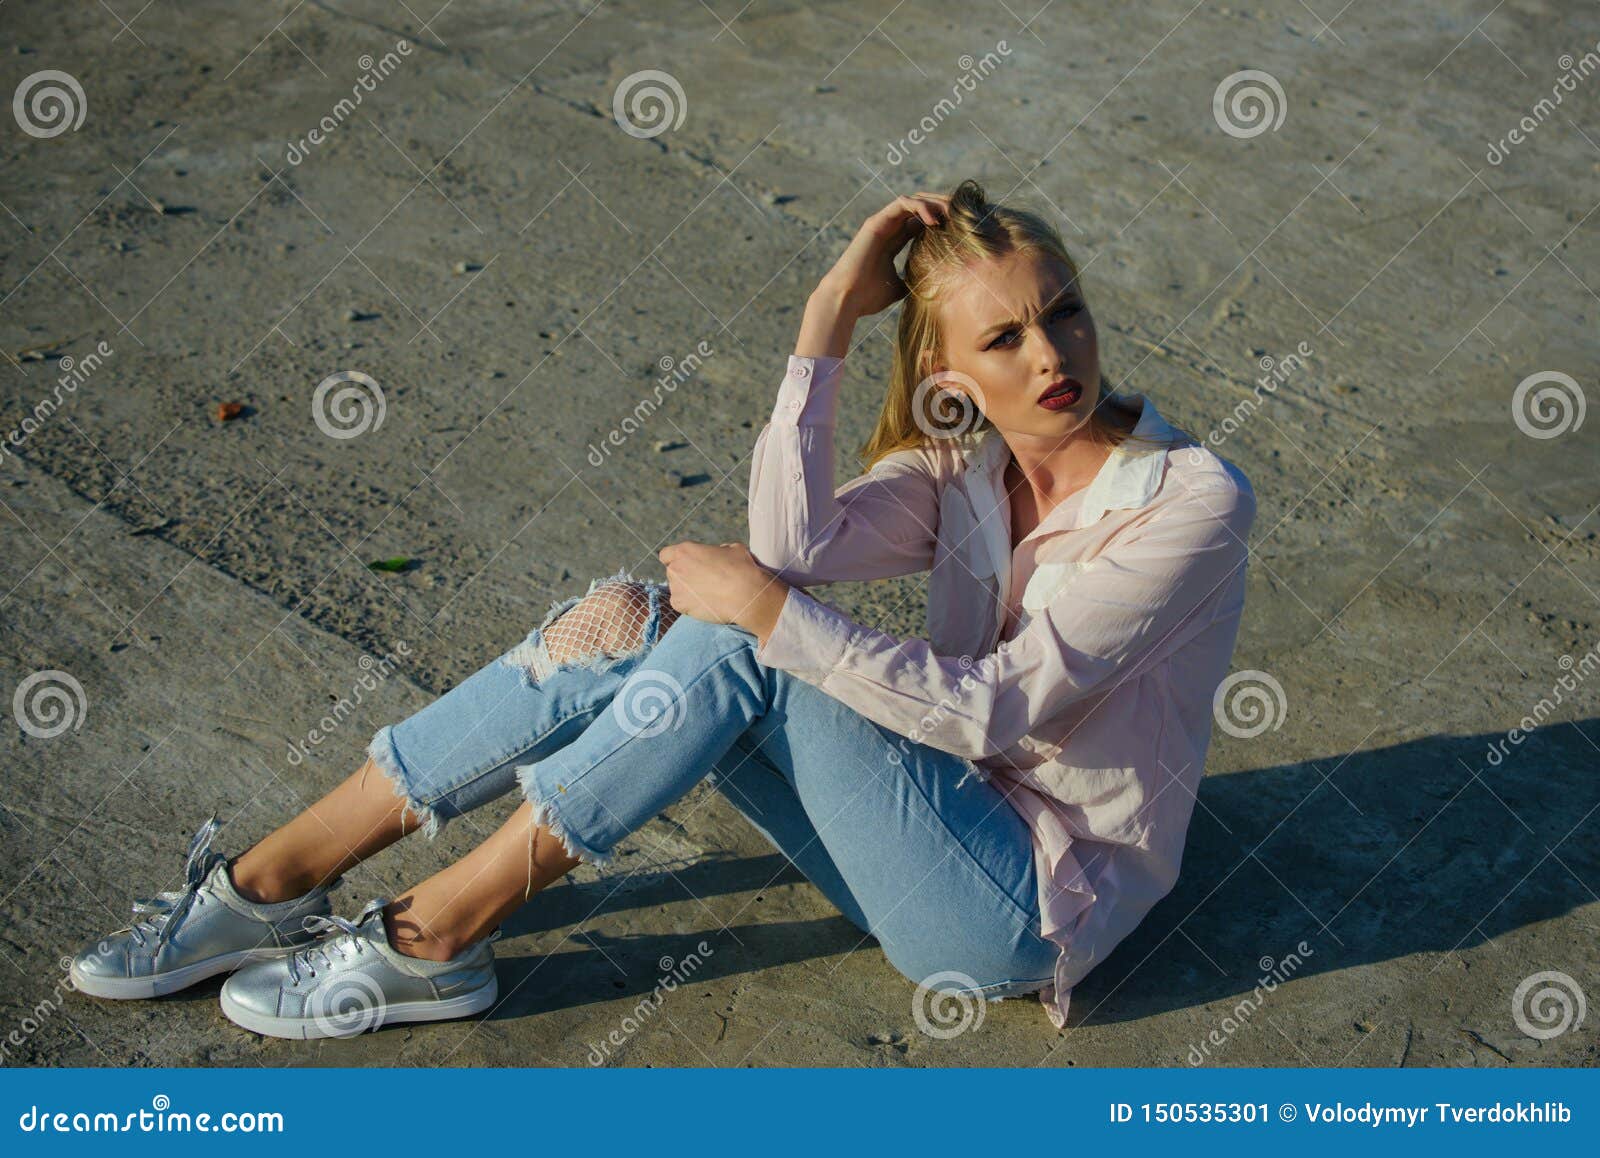 Woman Sit on Cement Ground, Fashion. Stock Image - Image of concrete,  fashionable: 150535301